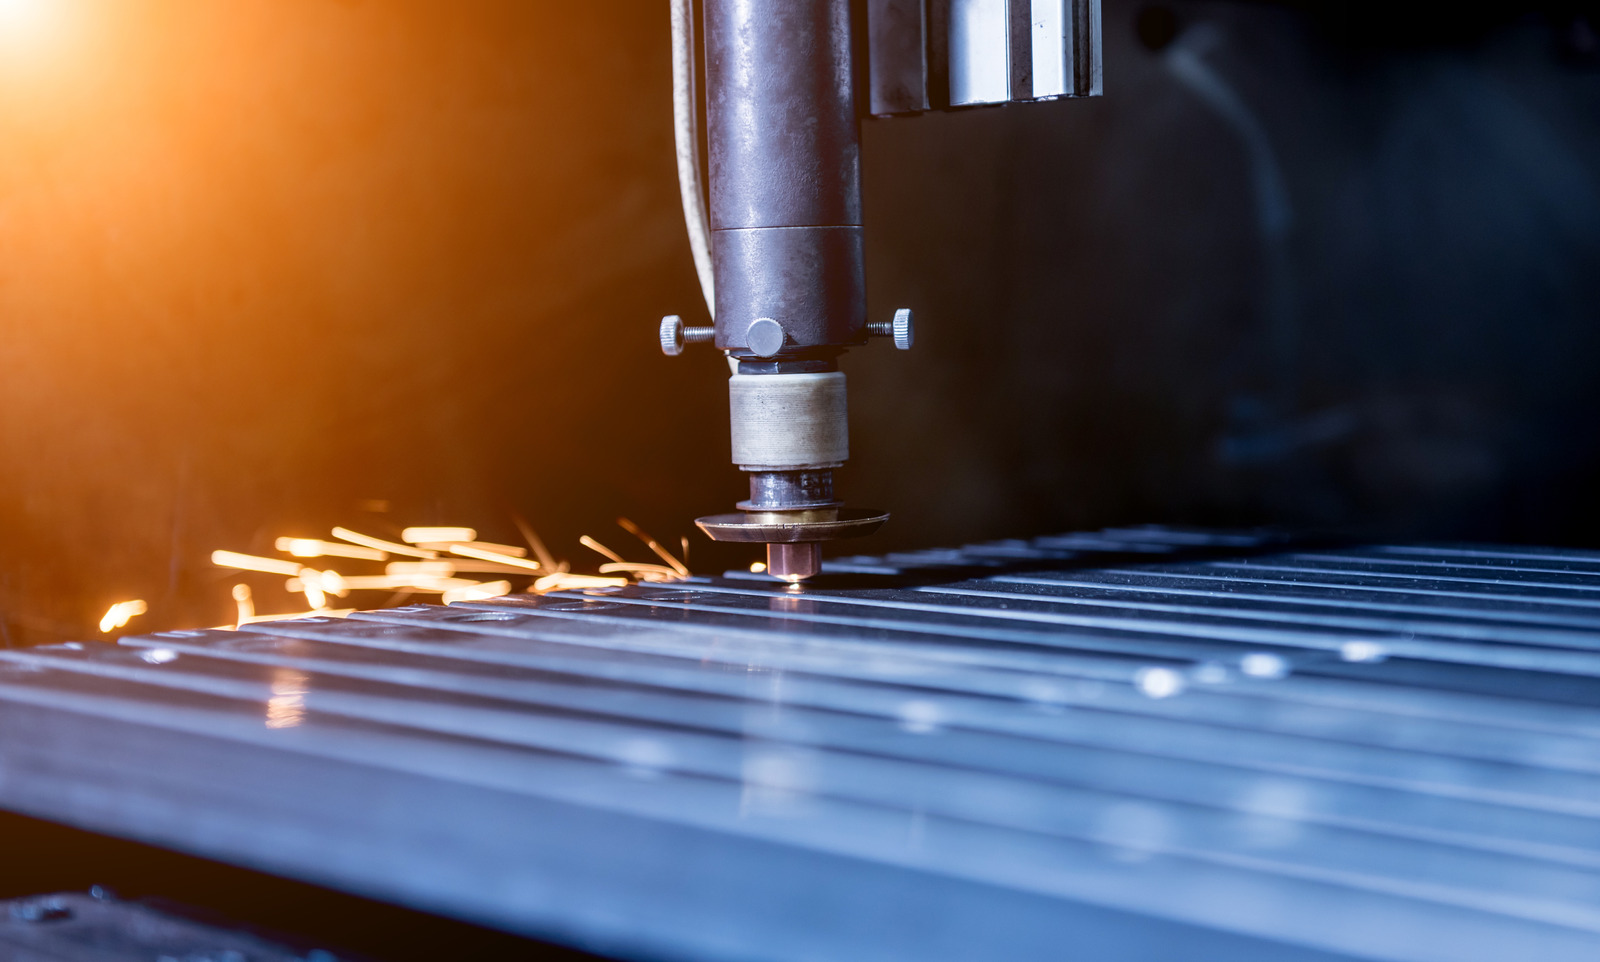 3D Printing and Laser Cutting: The Future of Manufacturing